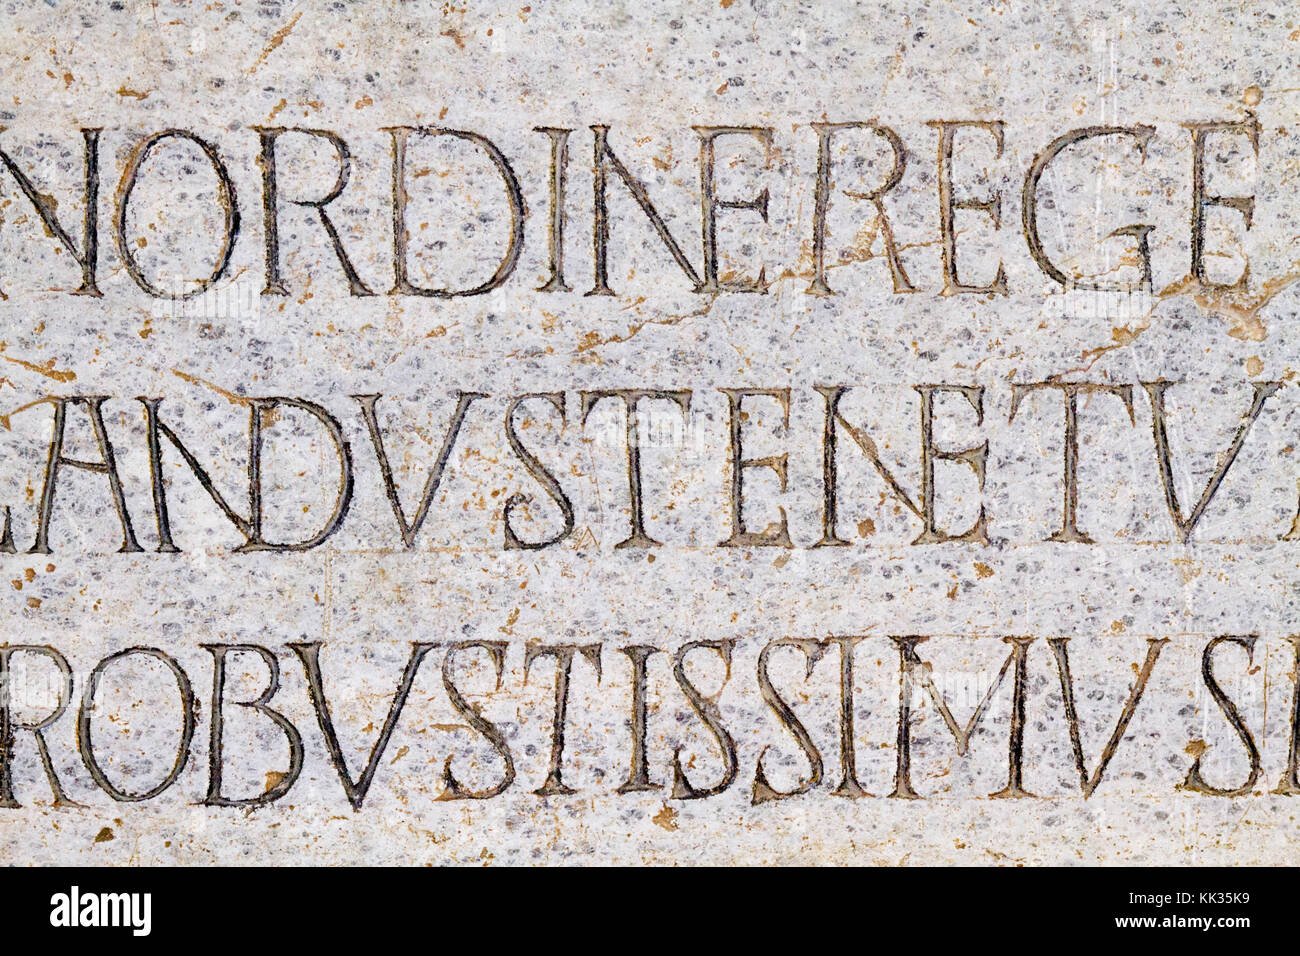 Pavia, Italy. November 11 2017. Rythmic epitaph on the marble gravestone of the Lombard King Cuniperto (also called Cuningpert, Cunicpert, Cuninopert) Stock Photo